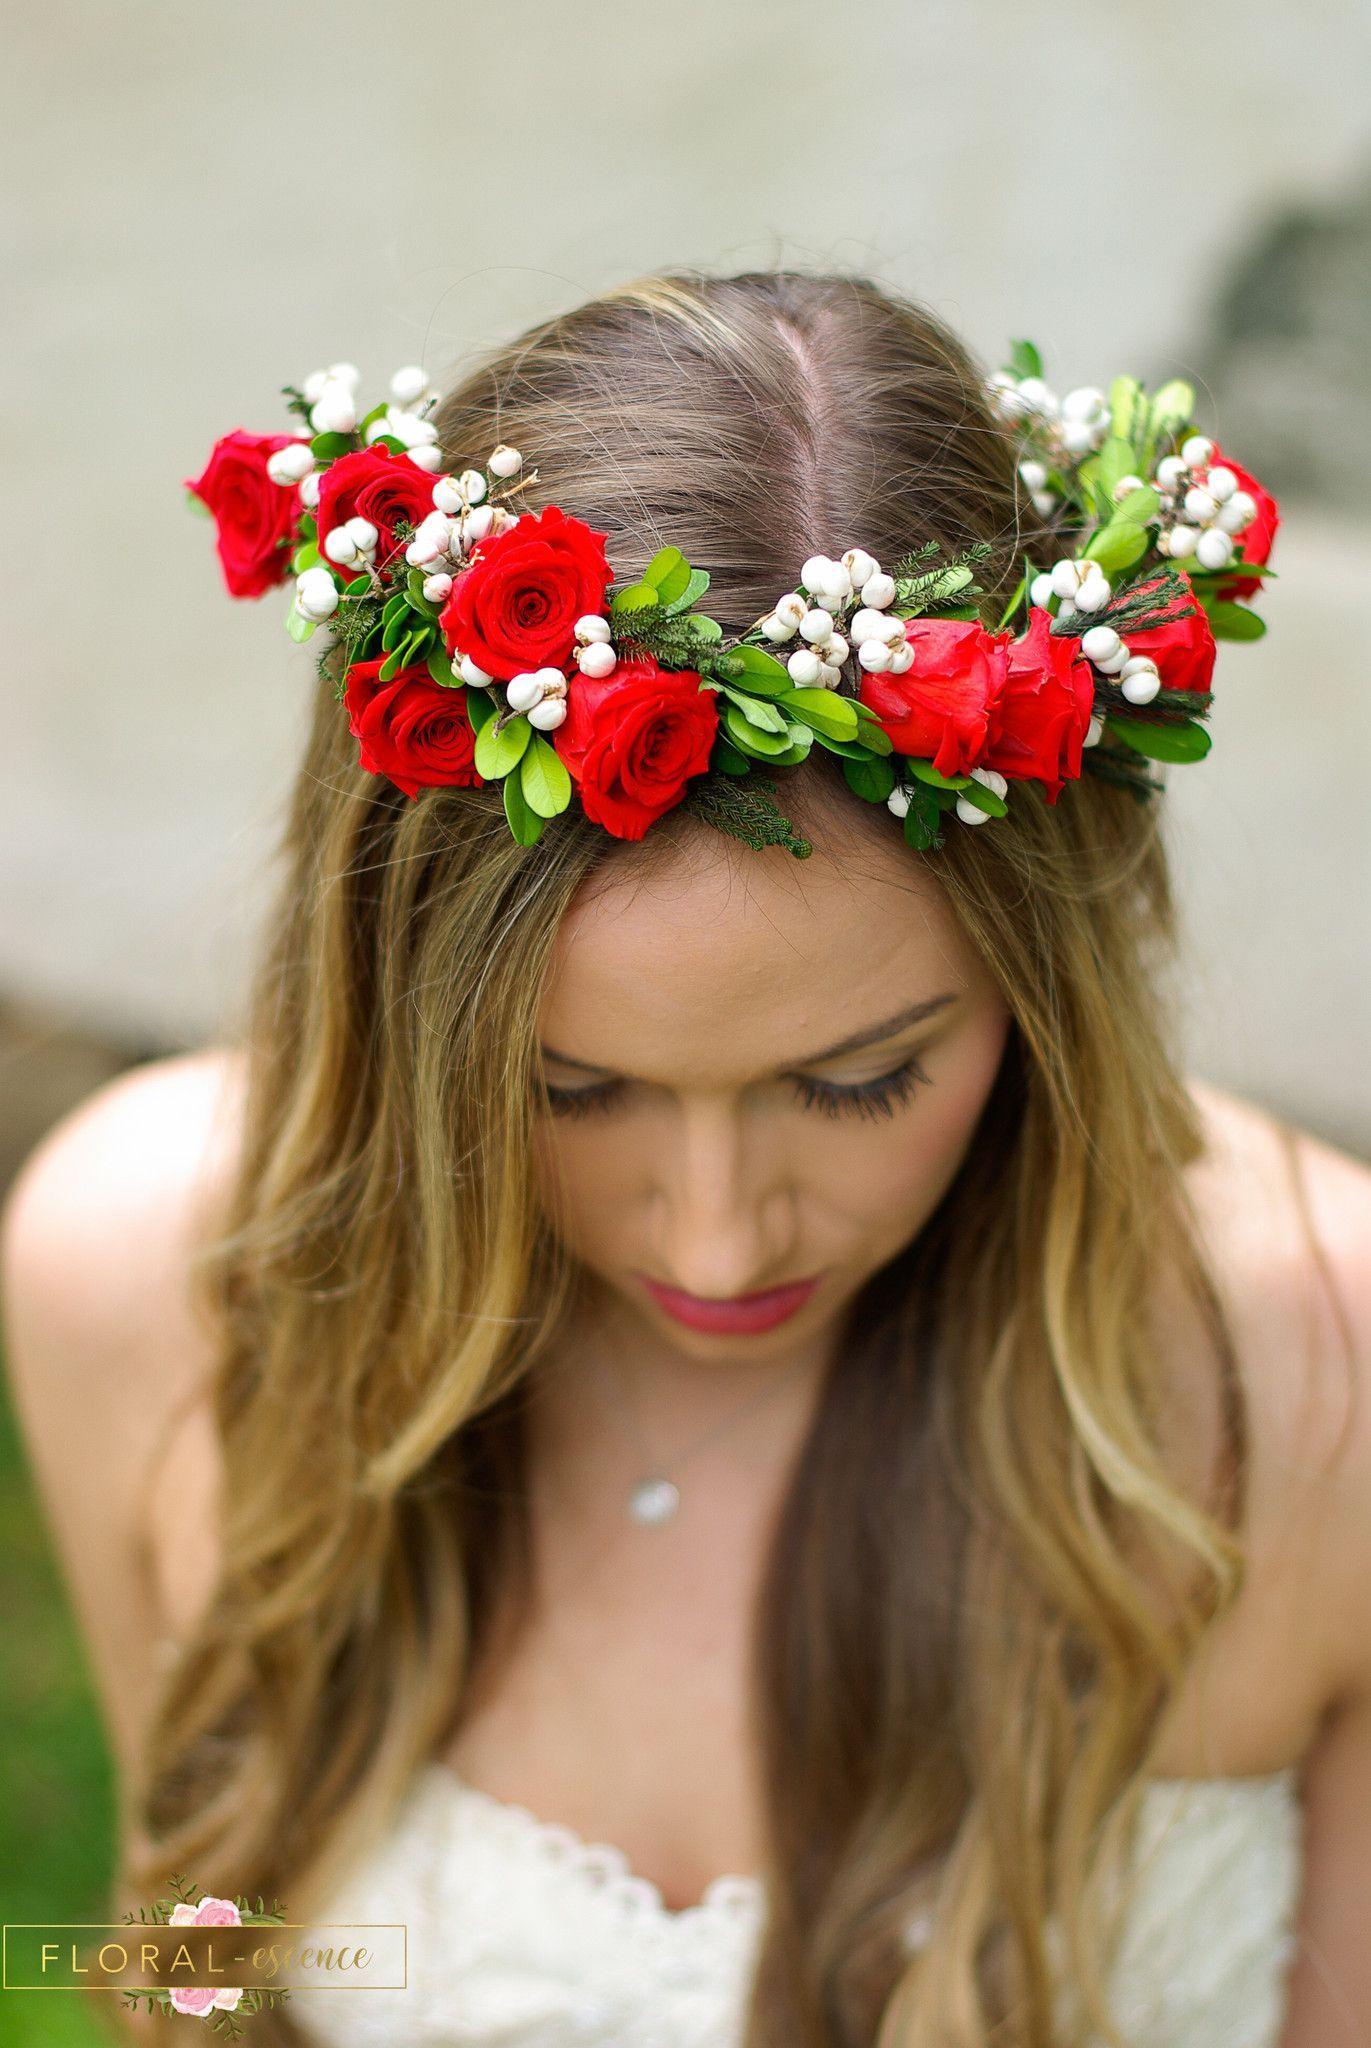 Gorgeous red rose flower crown with white tallow berries is